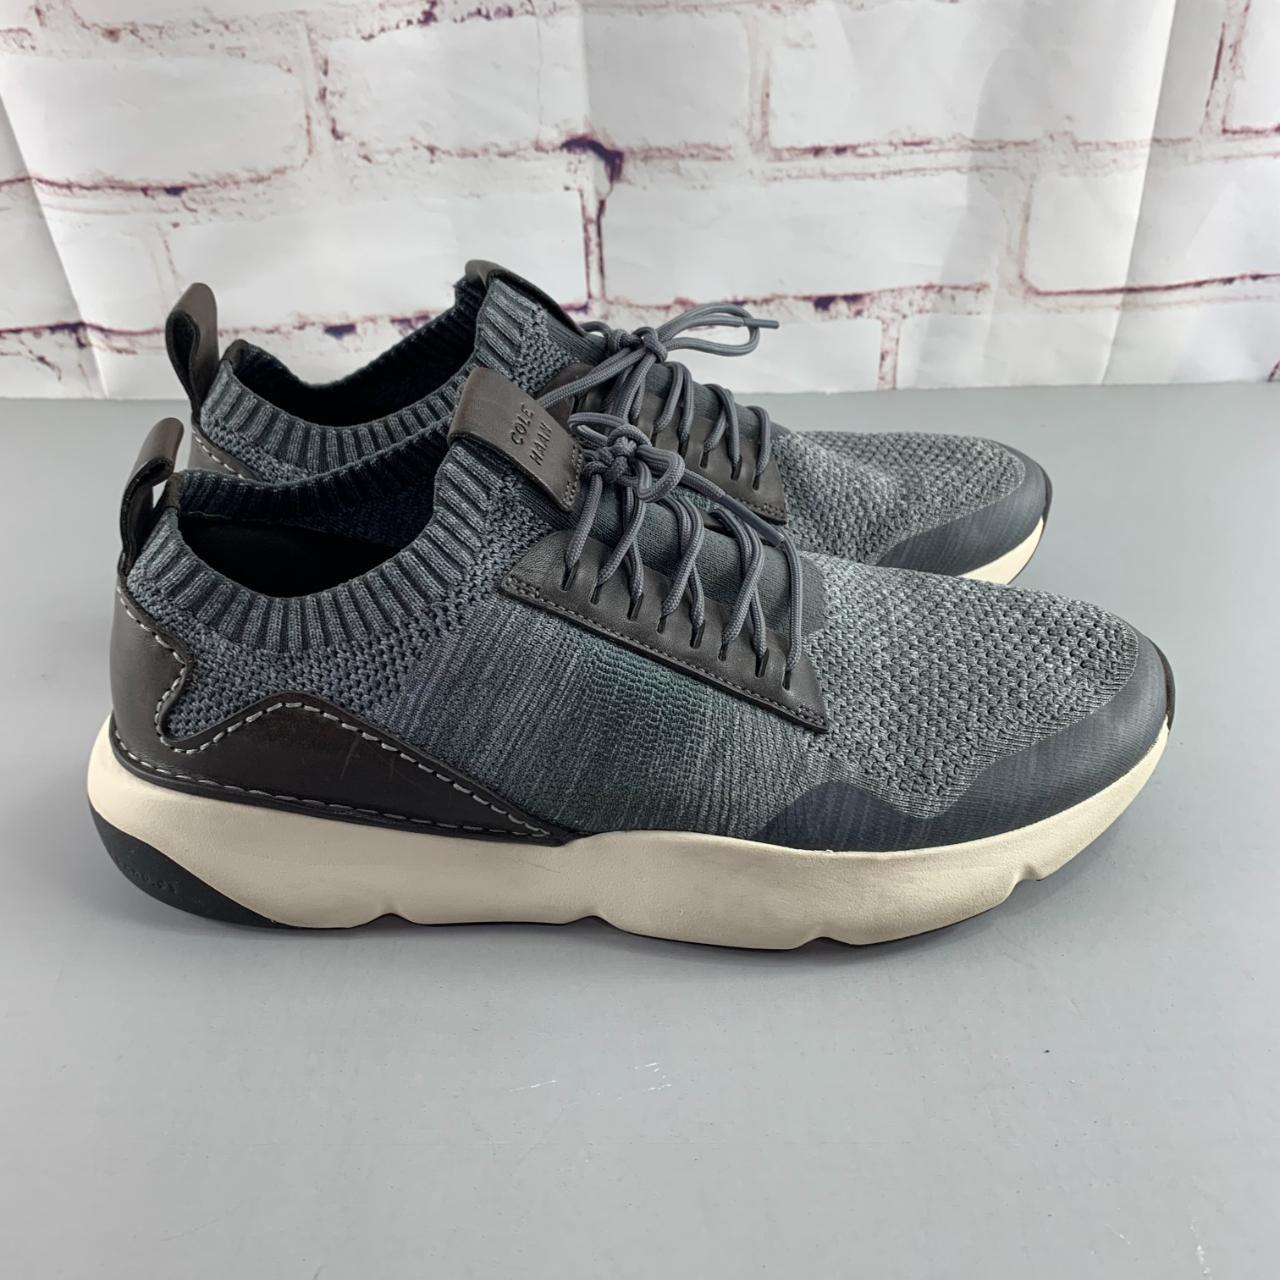 Cole Haan 3.Zero Grand Motion All Day Trainers Men's... - Depop